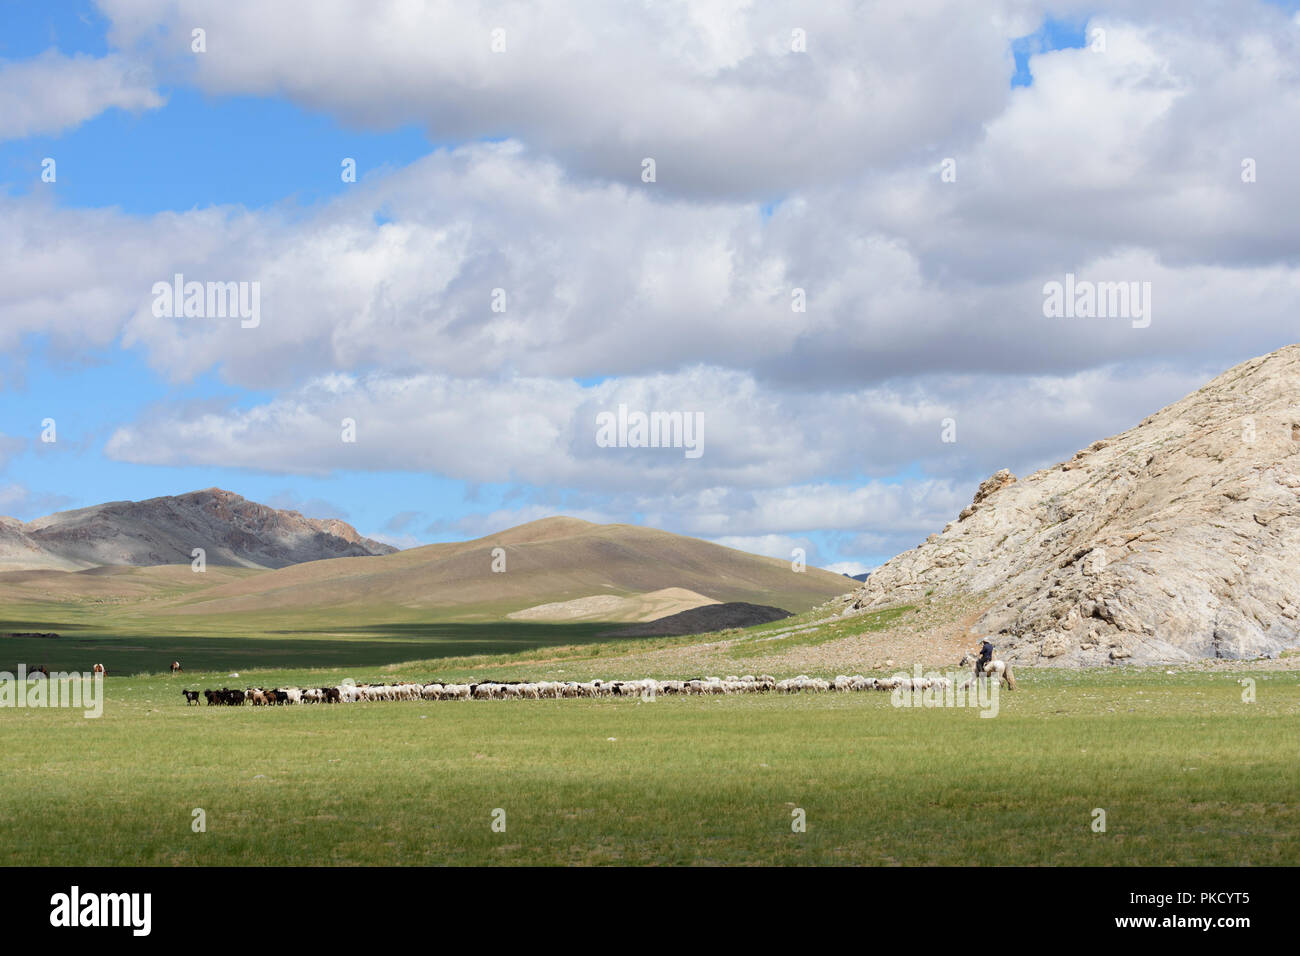 A nomad on horseback and his herd of sheep and goats on the steppe. Mongolia Stock Photo